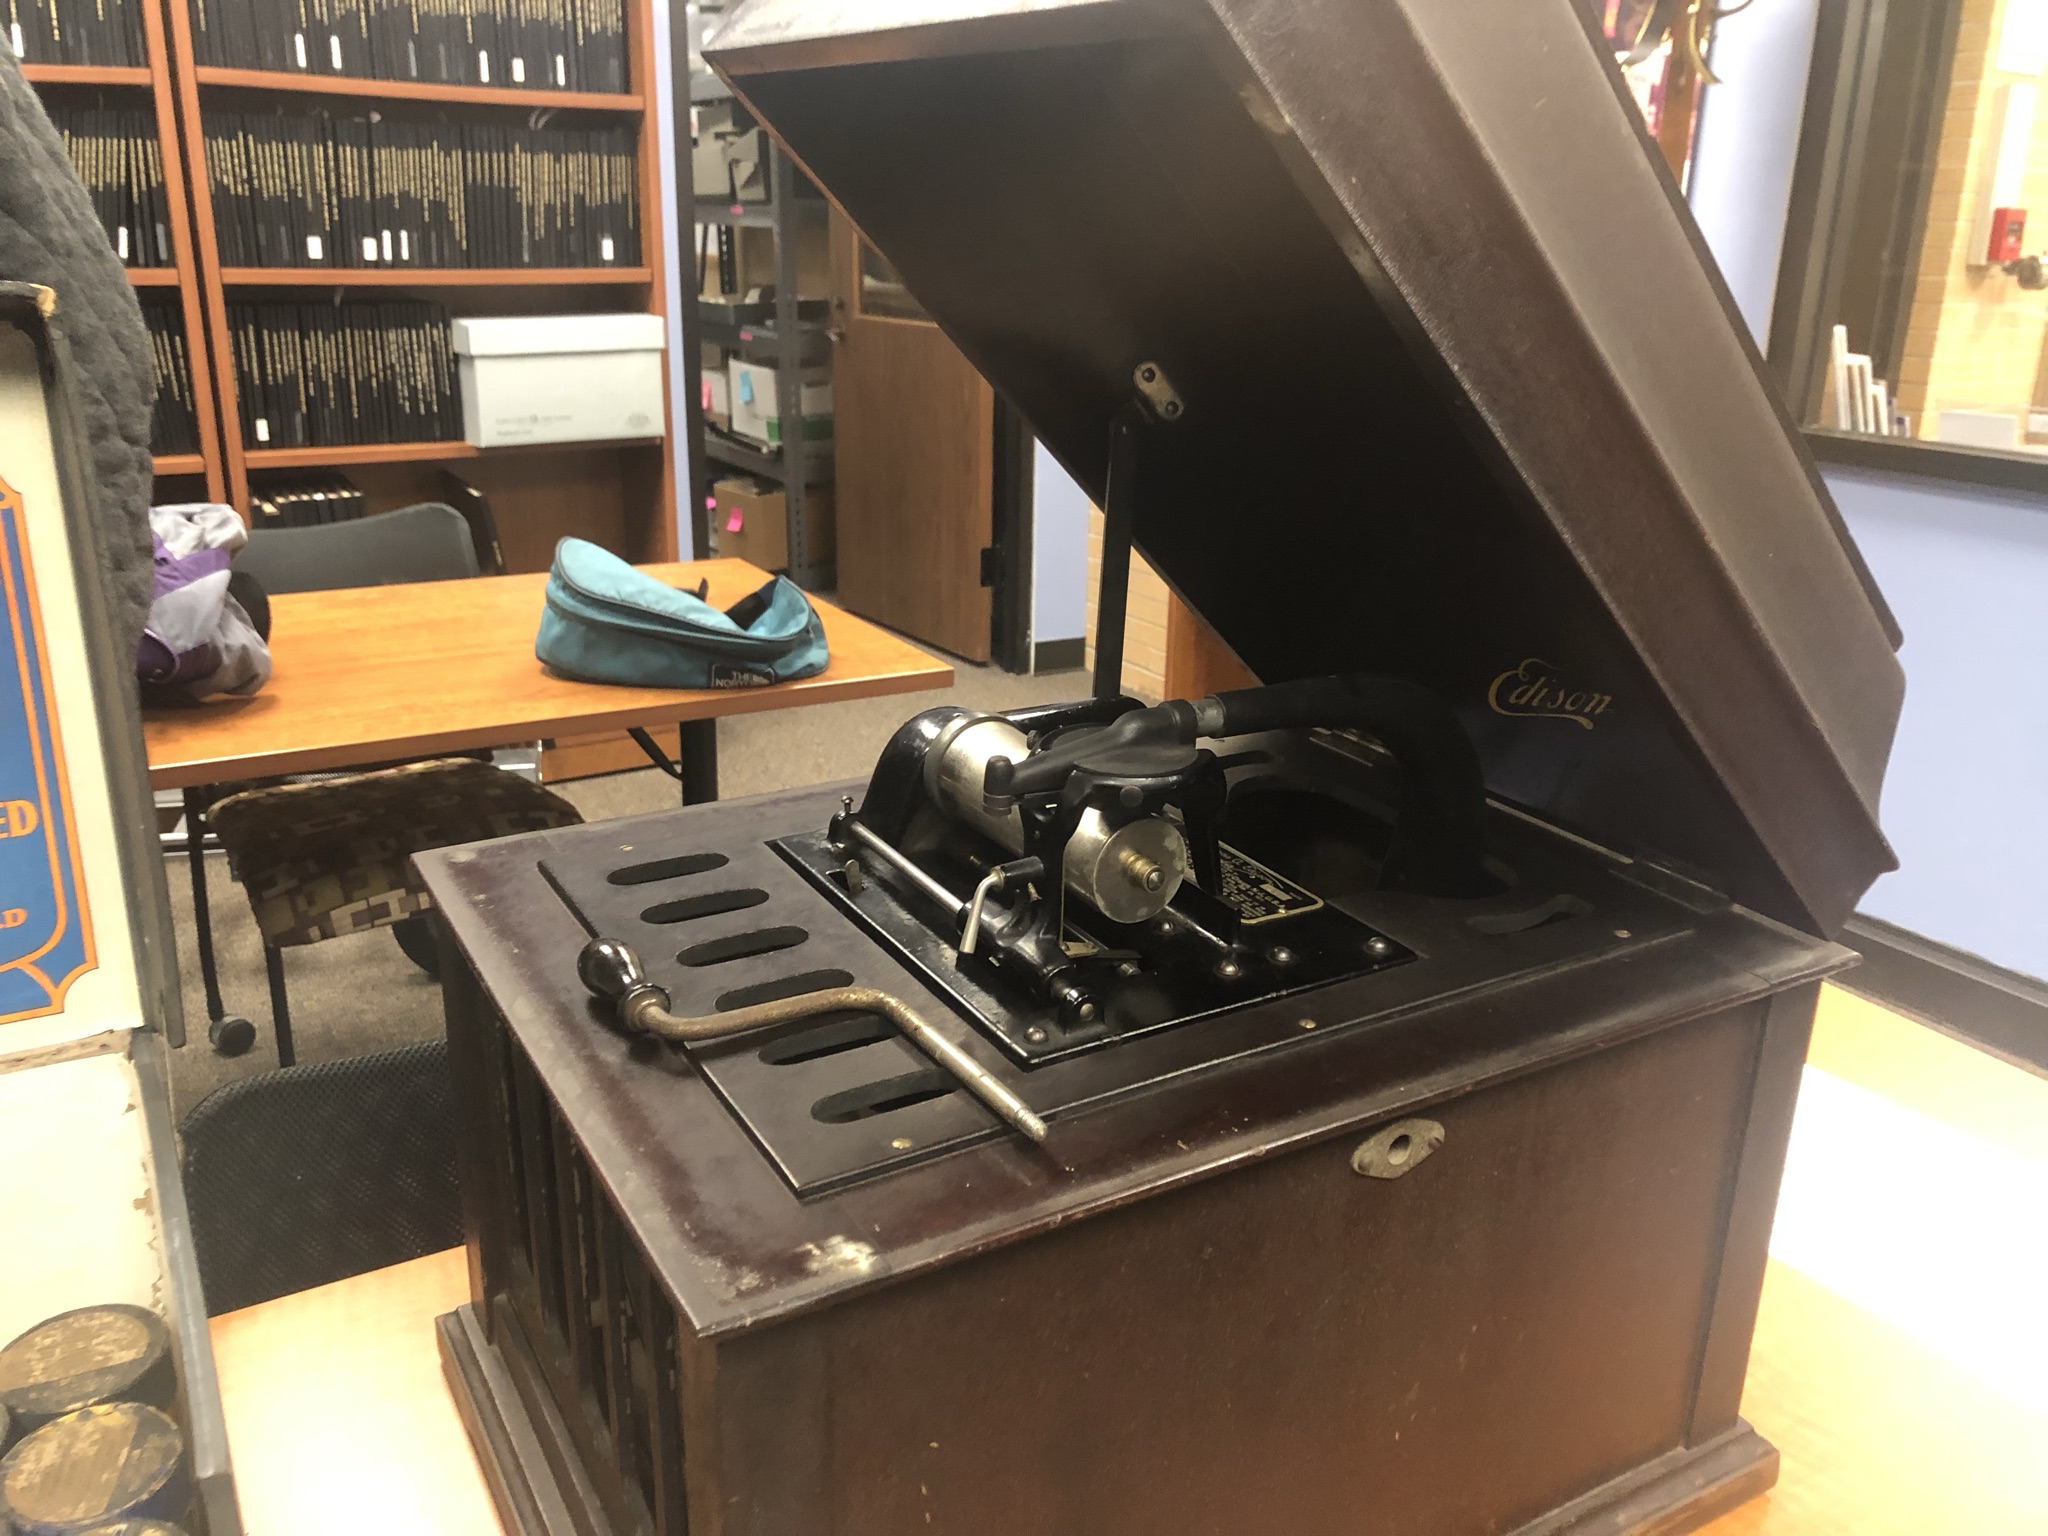 The Bentley Rare Book Museum's Amberola phonograph donated by Debbie and Tom Hepburn